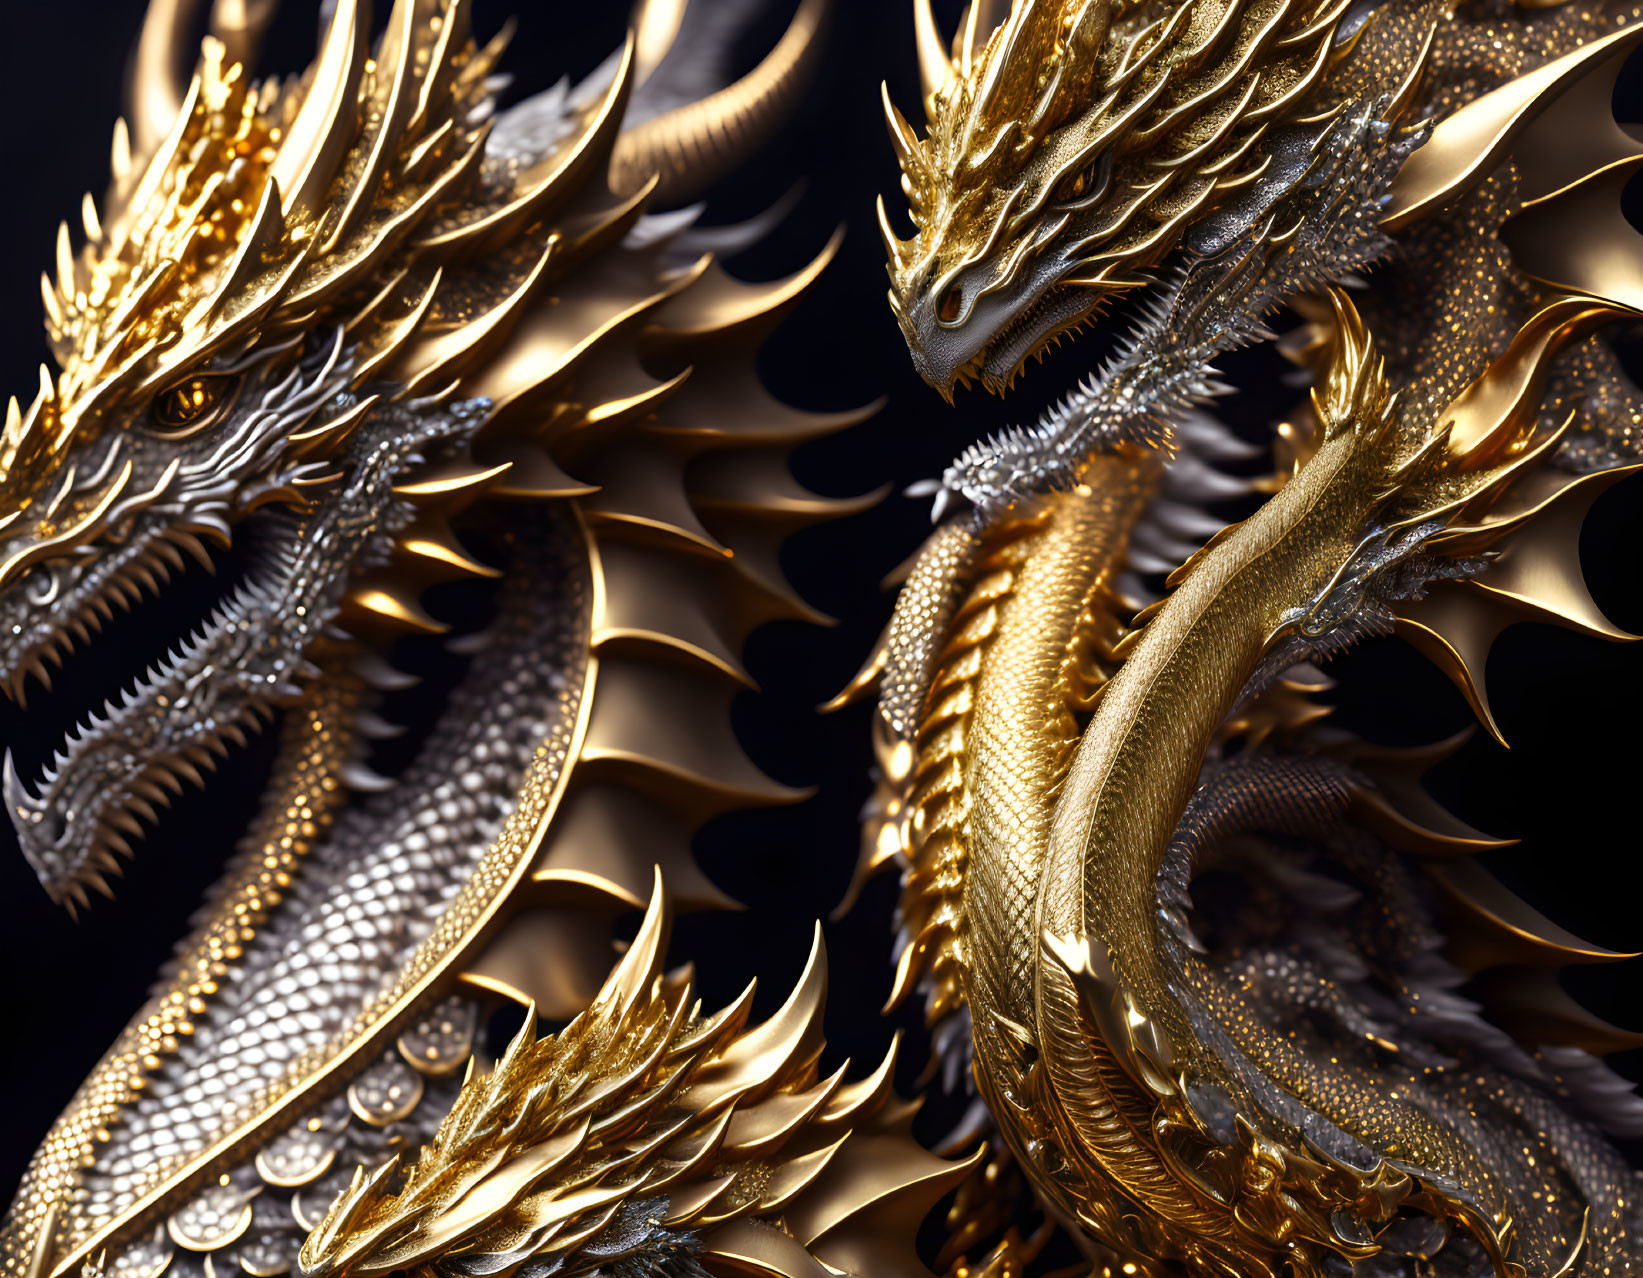 Detailed Image: Two Golden Dragons with Ornate Features